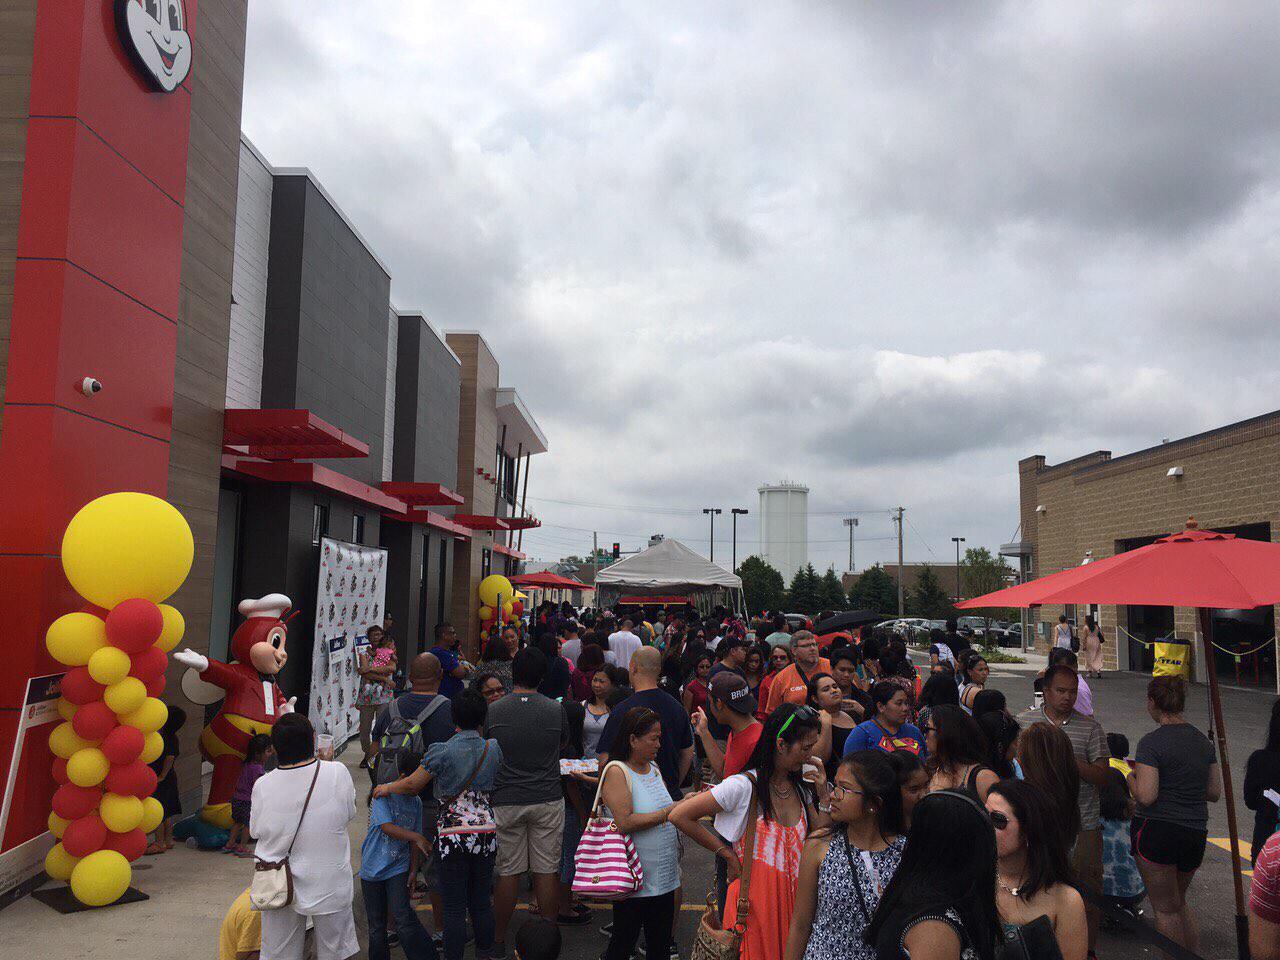 The lines at the new Jollibee store in Skokie, Chicago are still long with Filipinos braving bad weather just to get a bite of that crispilicious, juicylicious Chickenjoy.